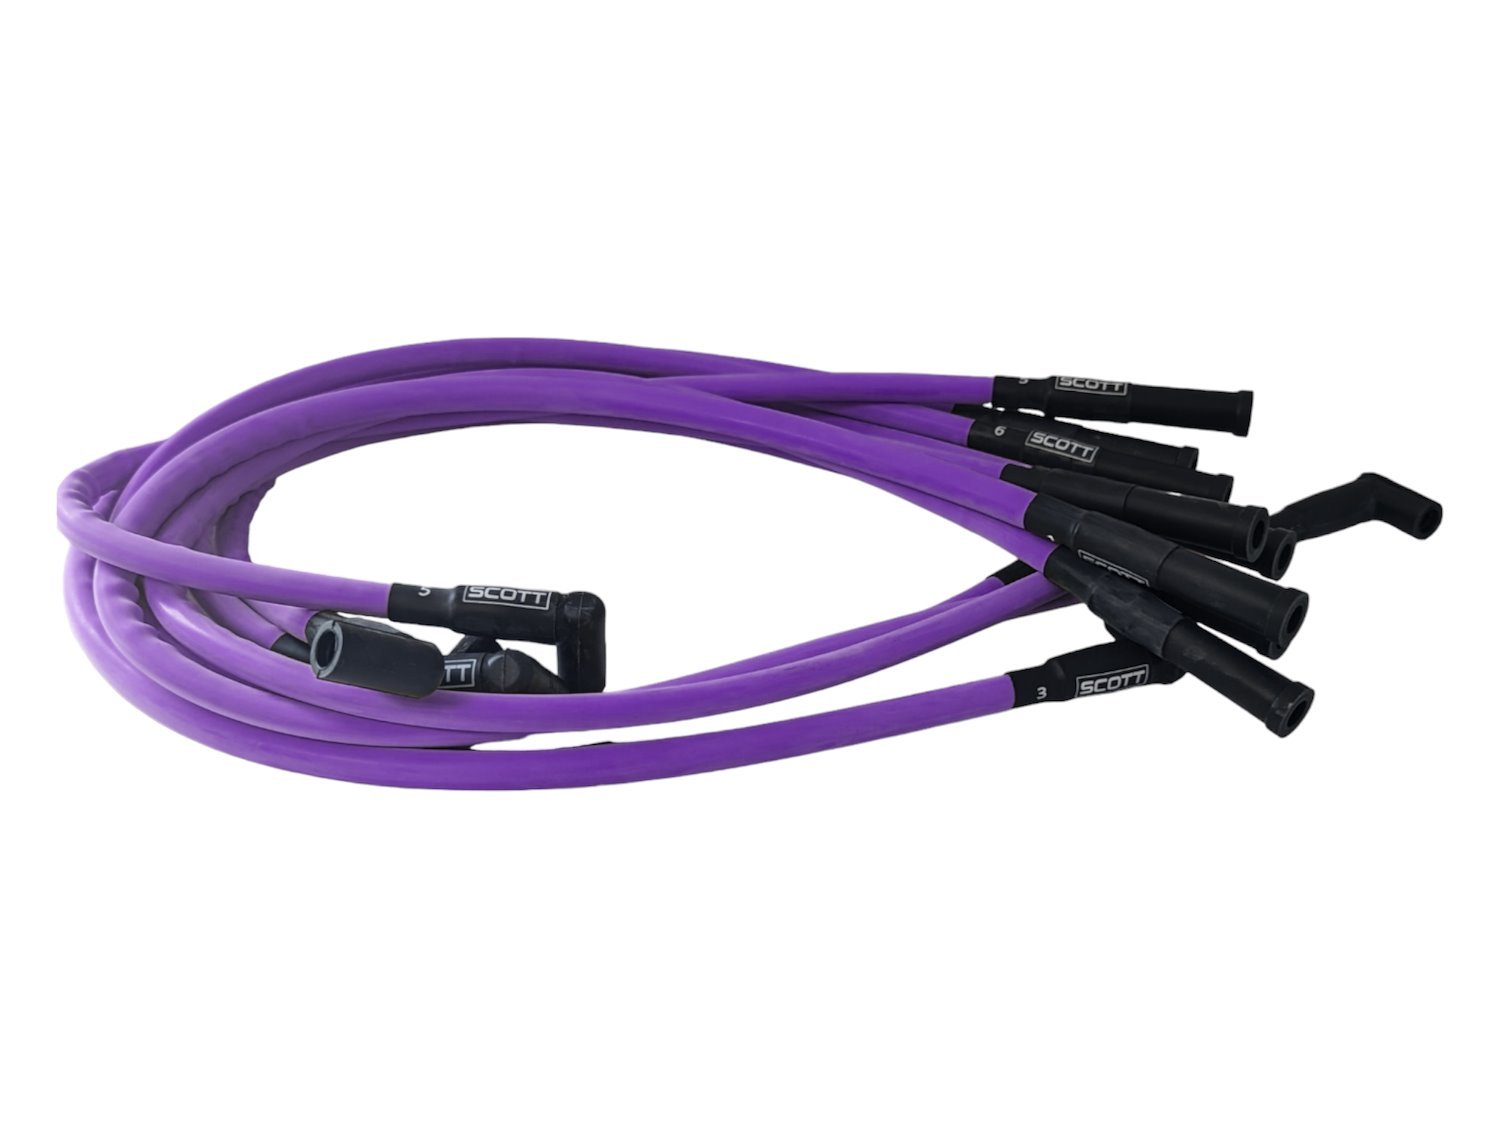 SPW300-CH-421-6 Super Mag Fiberglass-Oversleeved Spark Plug Wire Set for Small Block Chevy, Over Valve Cover [Purple]